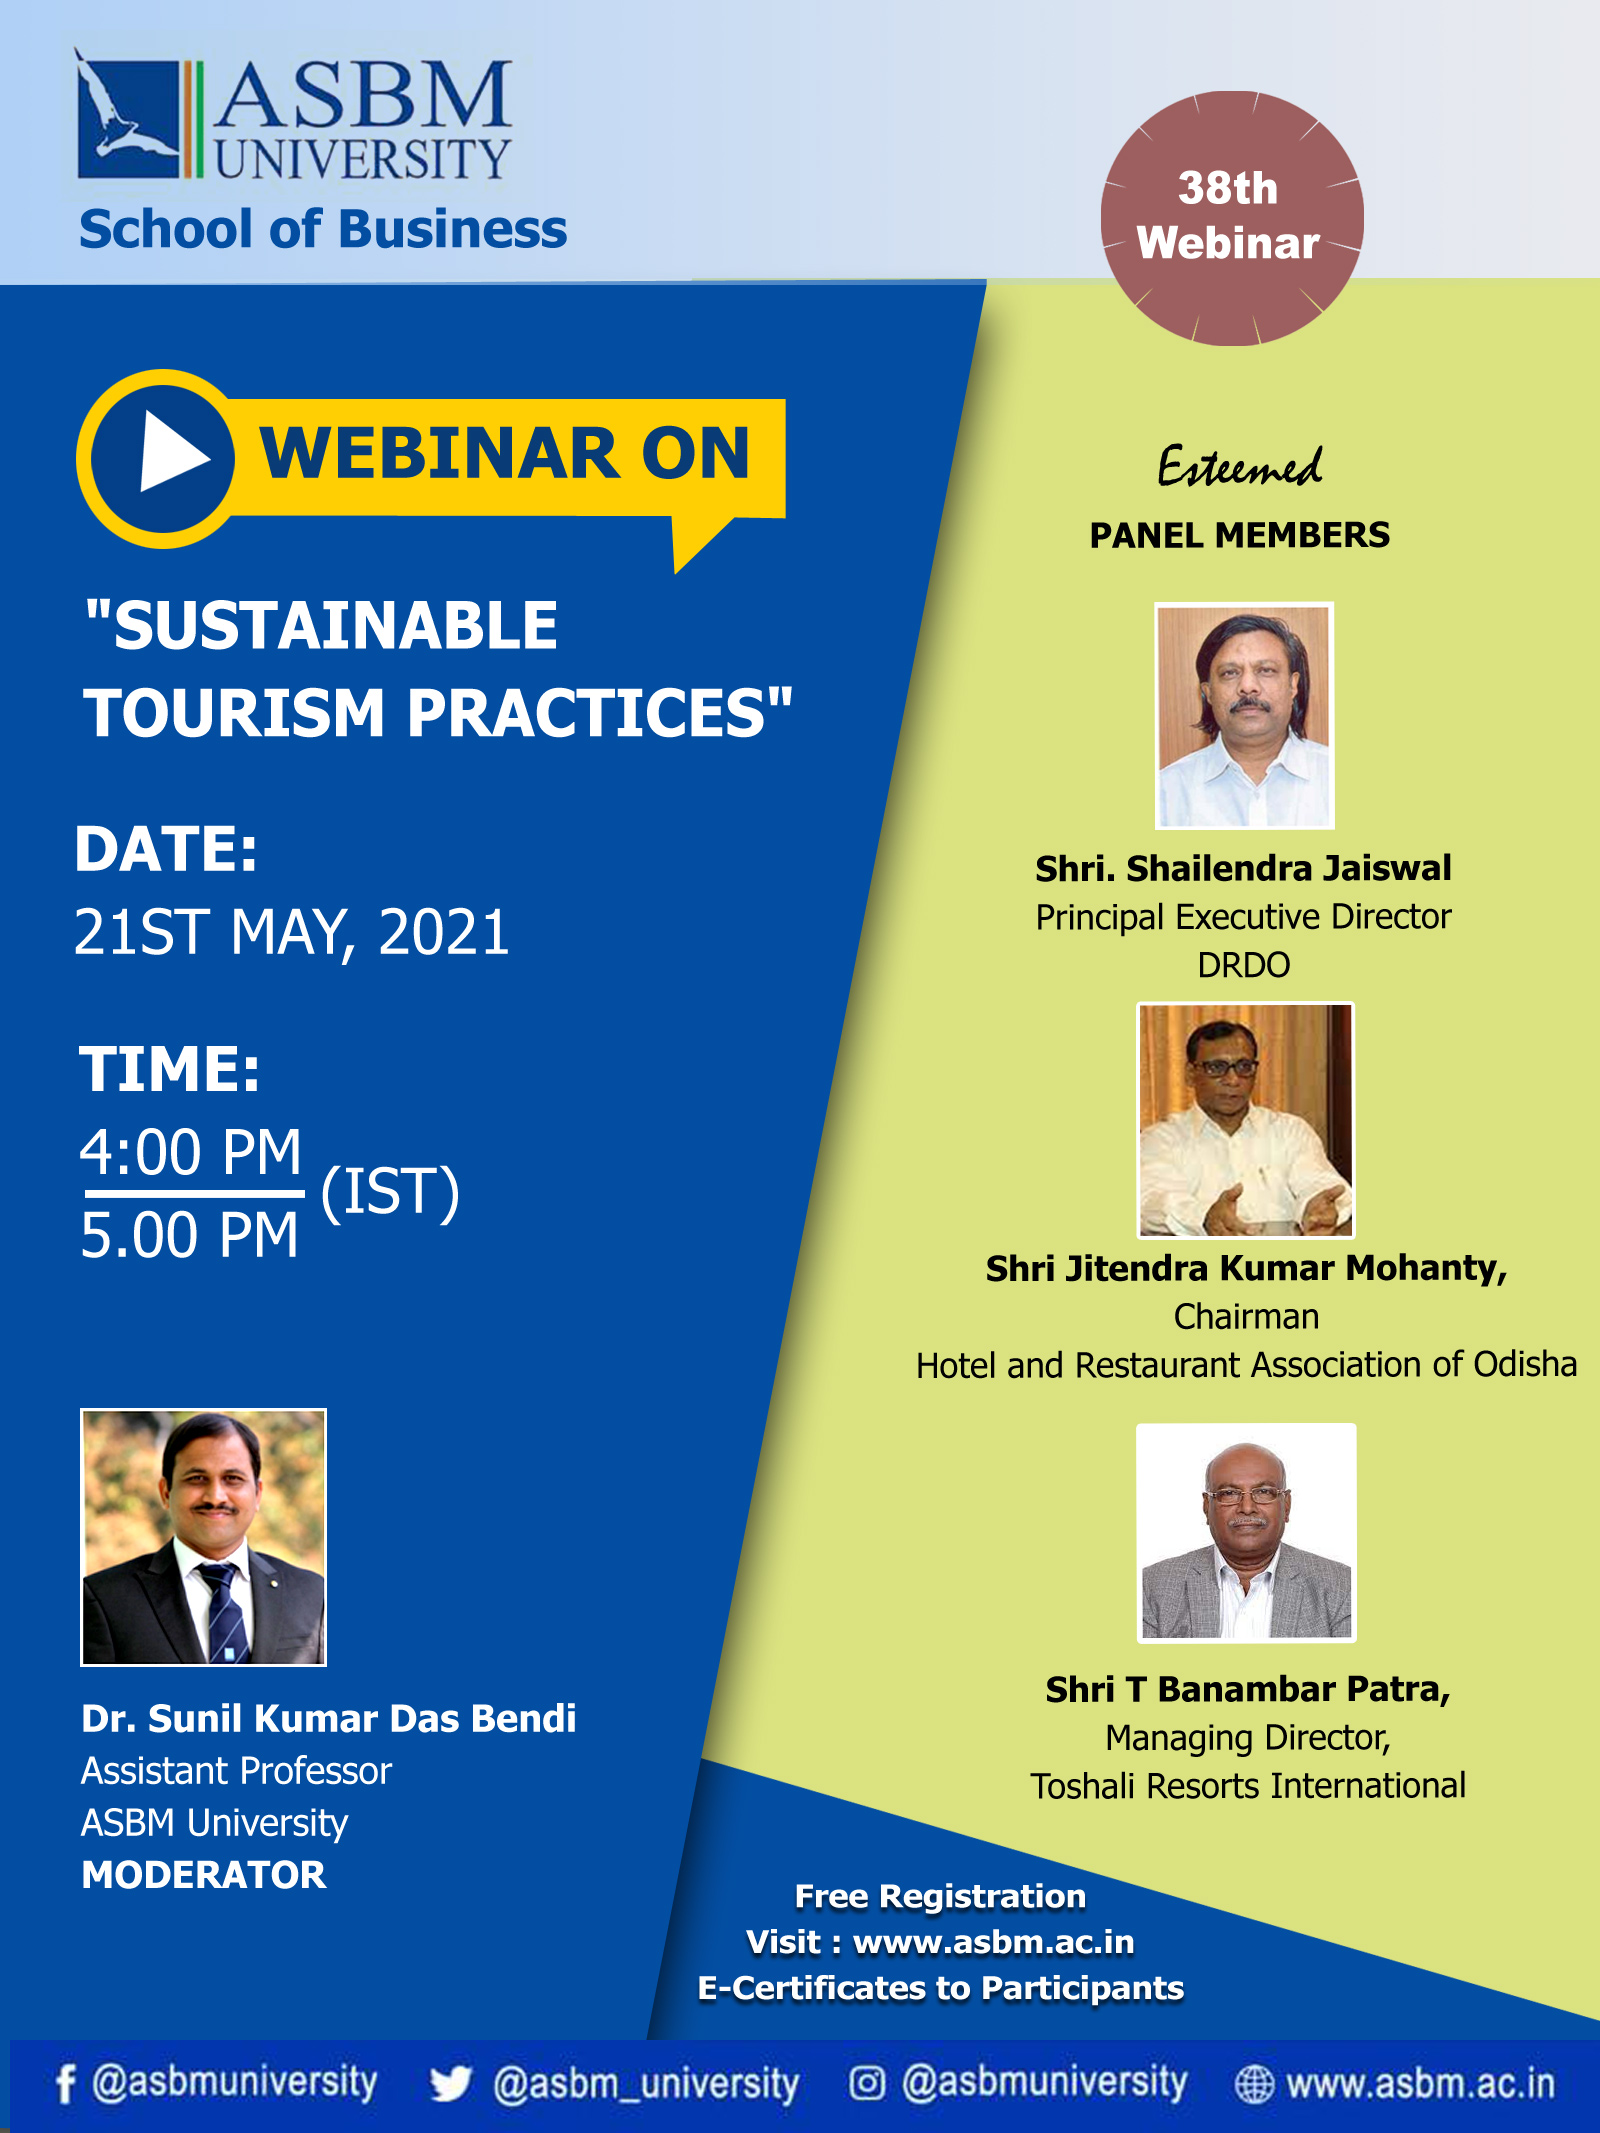 38th Webinar on “SUSTAINABLE TOURISM PRACTICES”